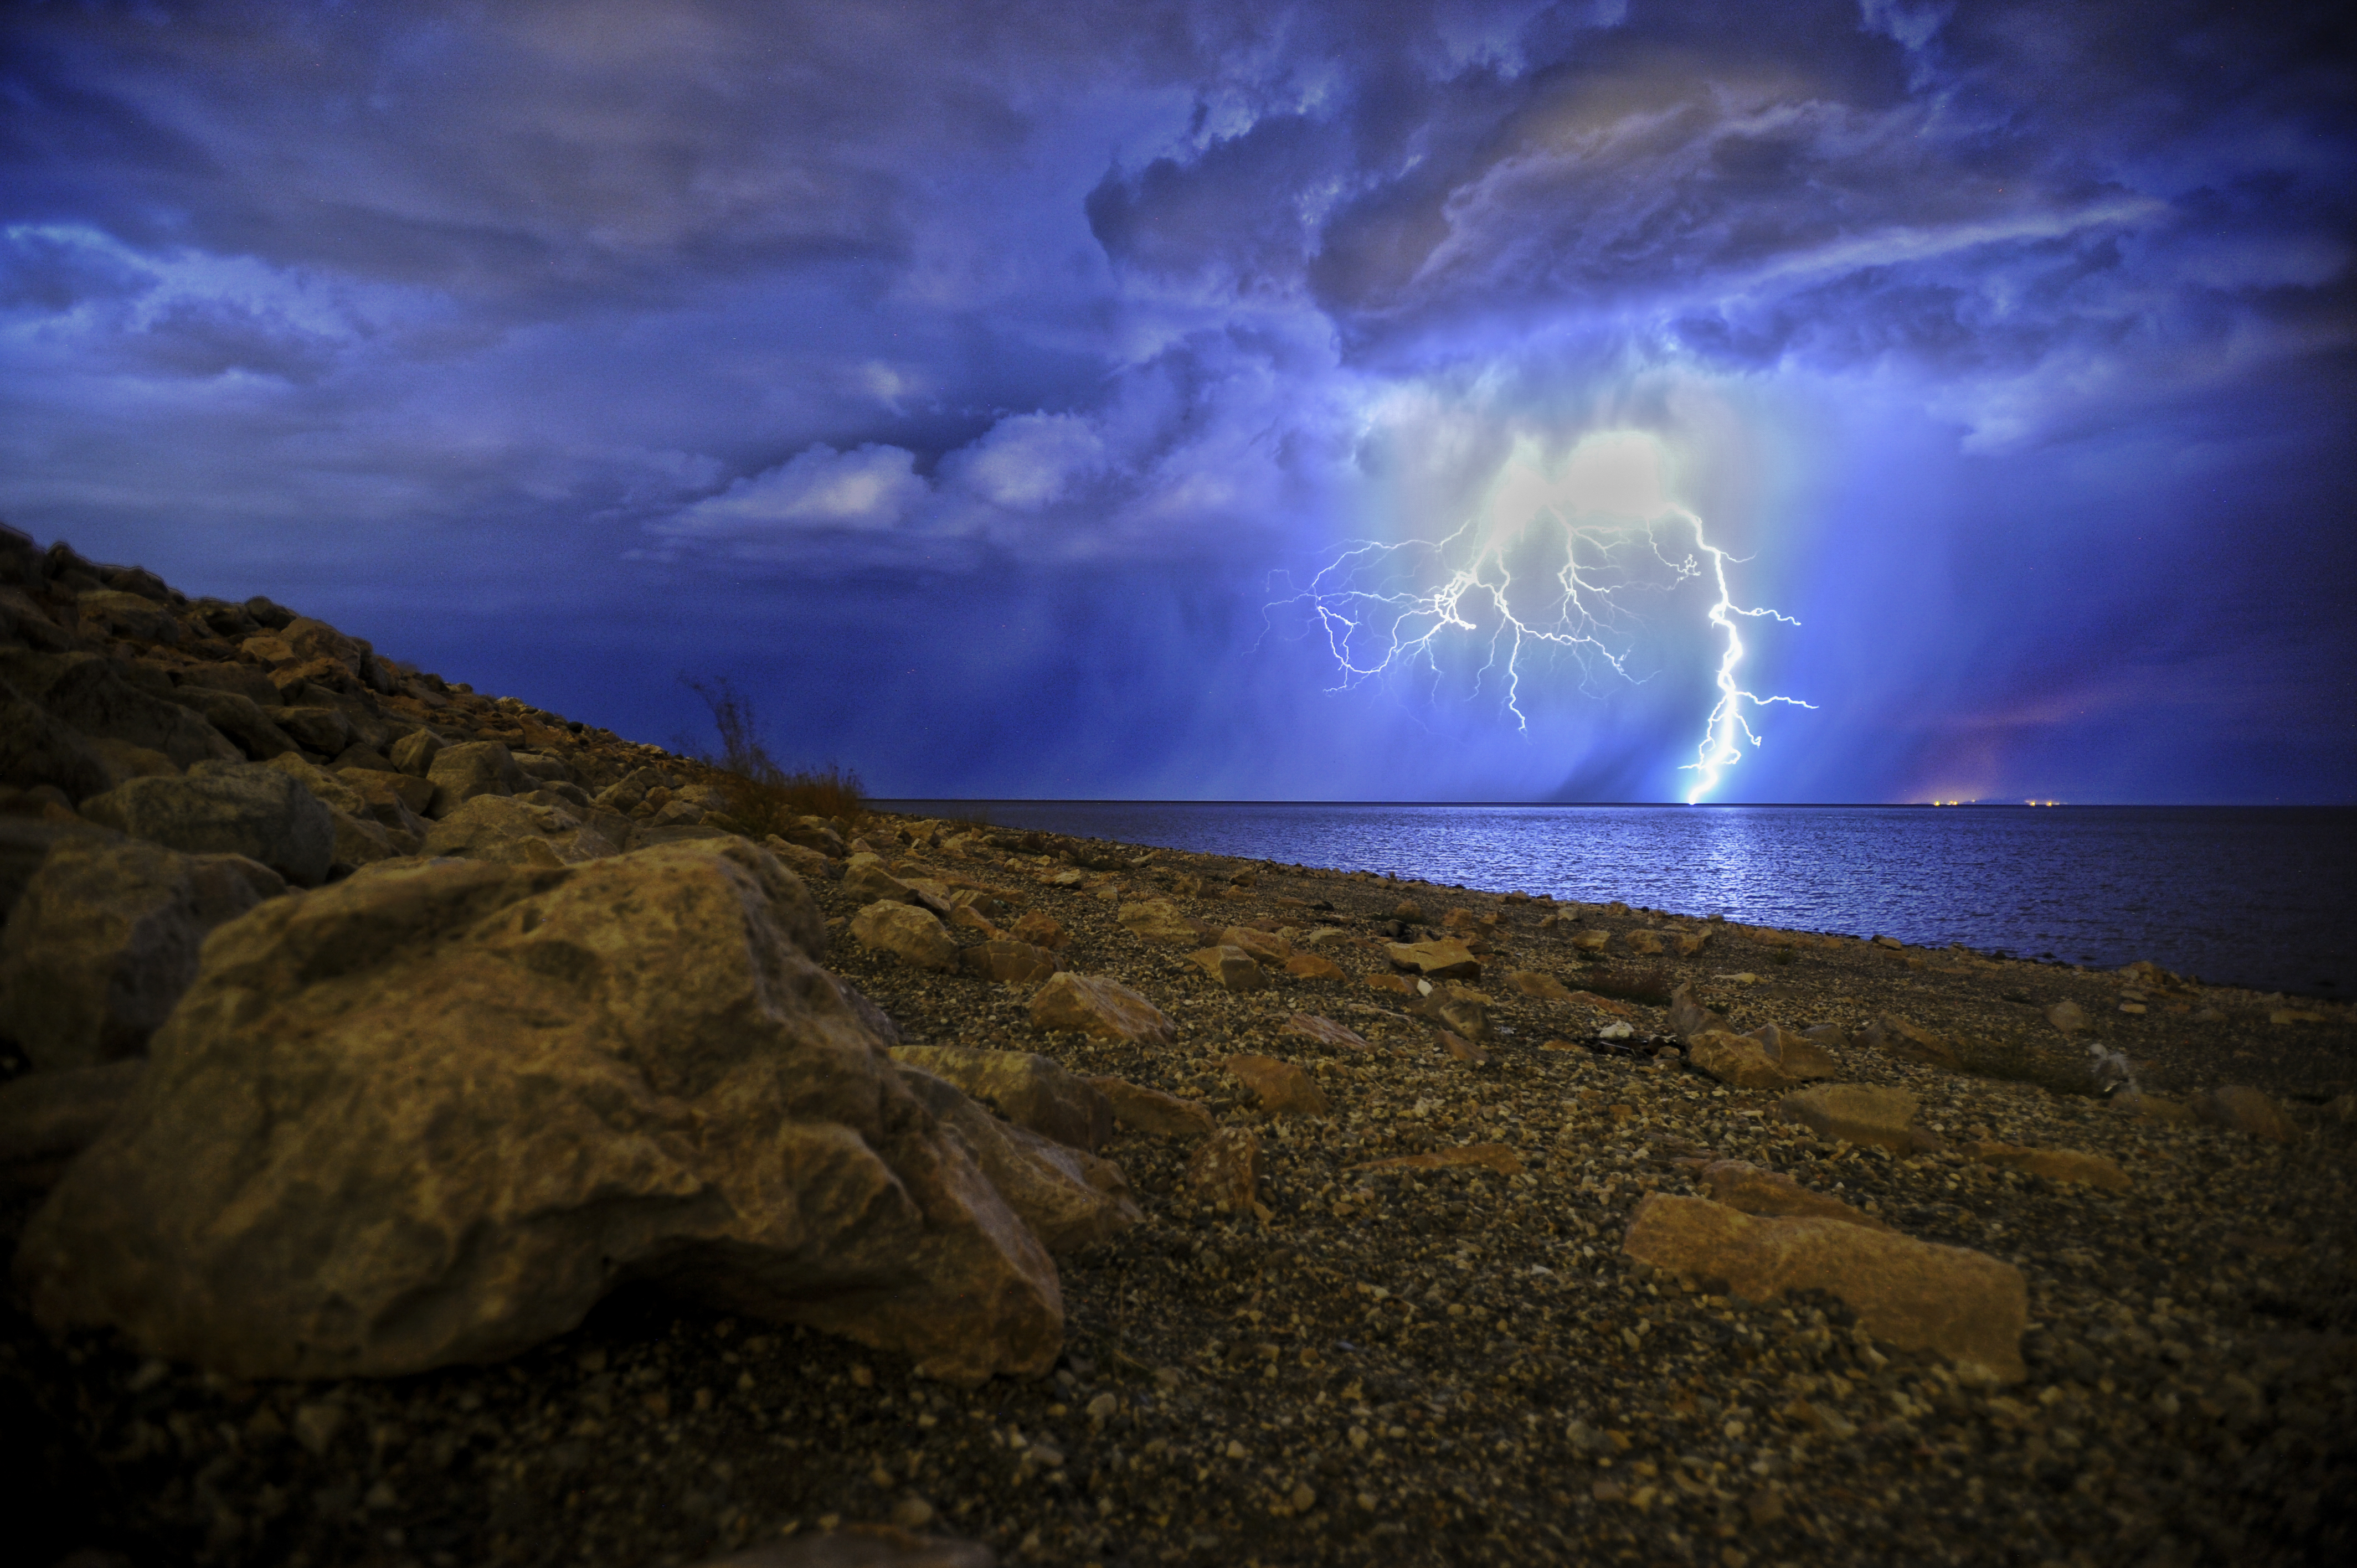 android thunderstorm, nature, night, lake, shore, bank, mainly cloudy, overcast, storm